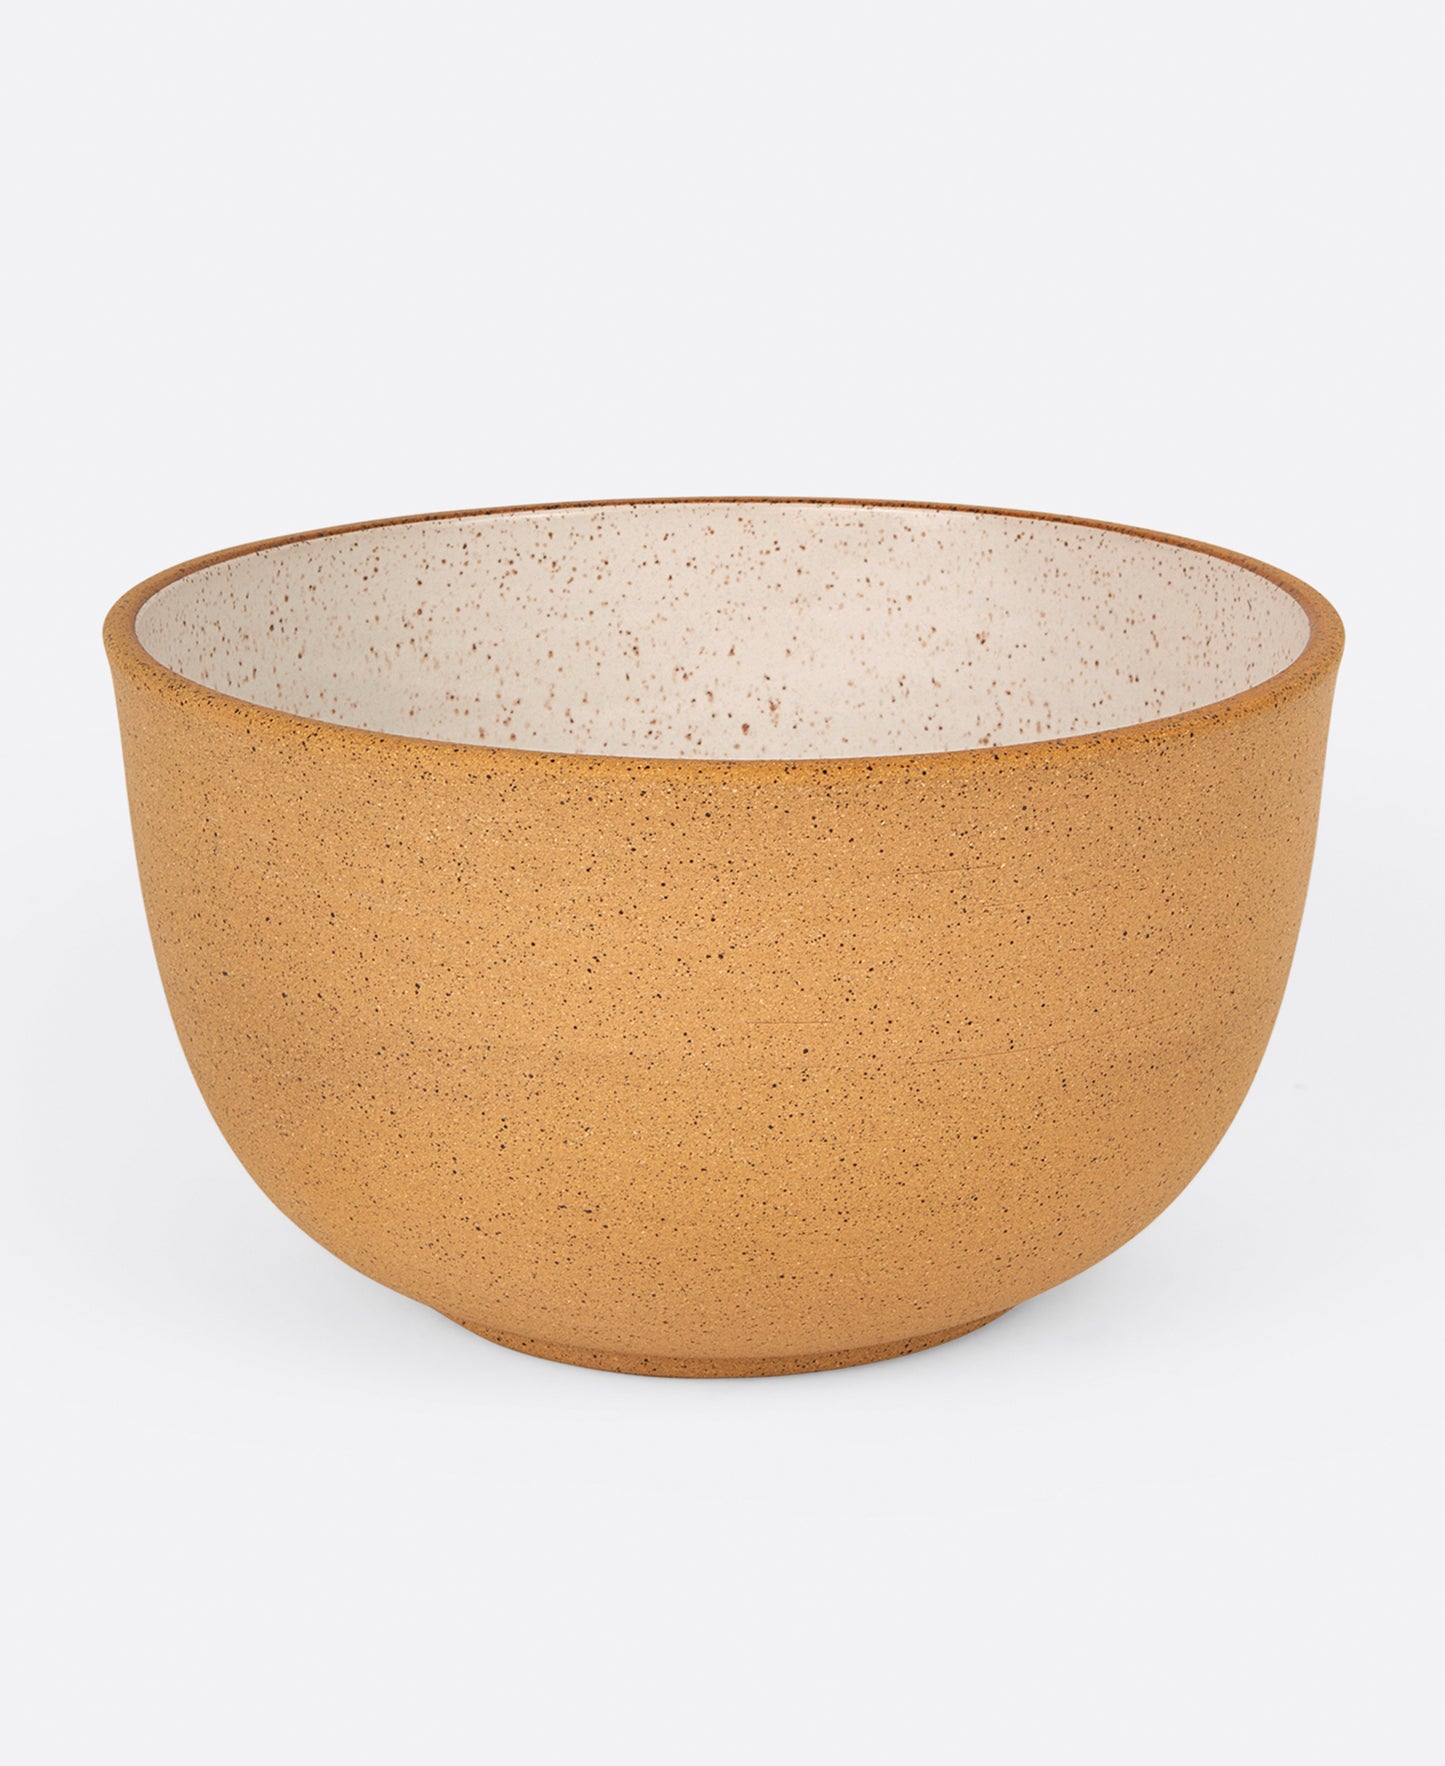 A stoneware salad bowl with a raw exterior and white glazed interior, shown from the side.